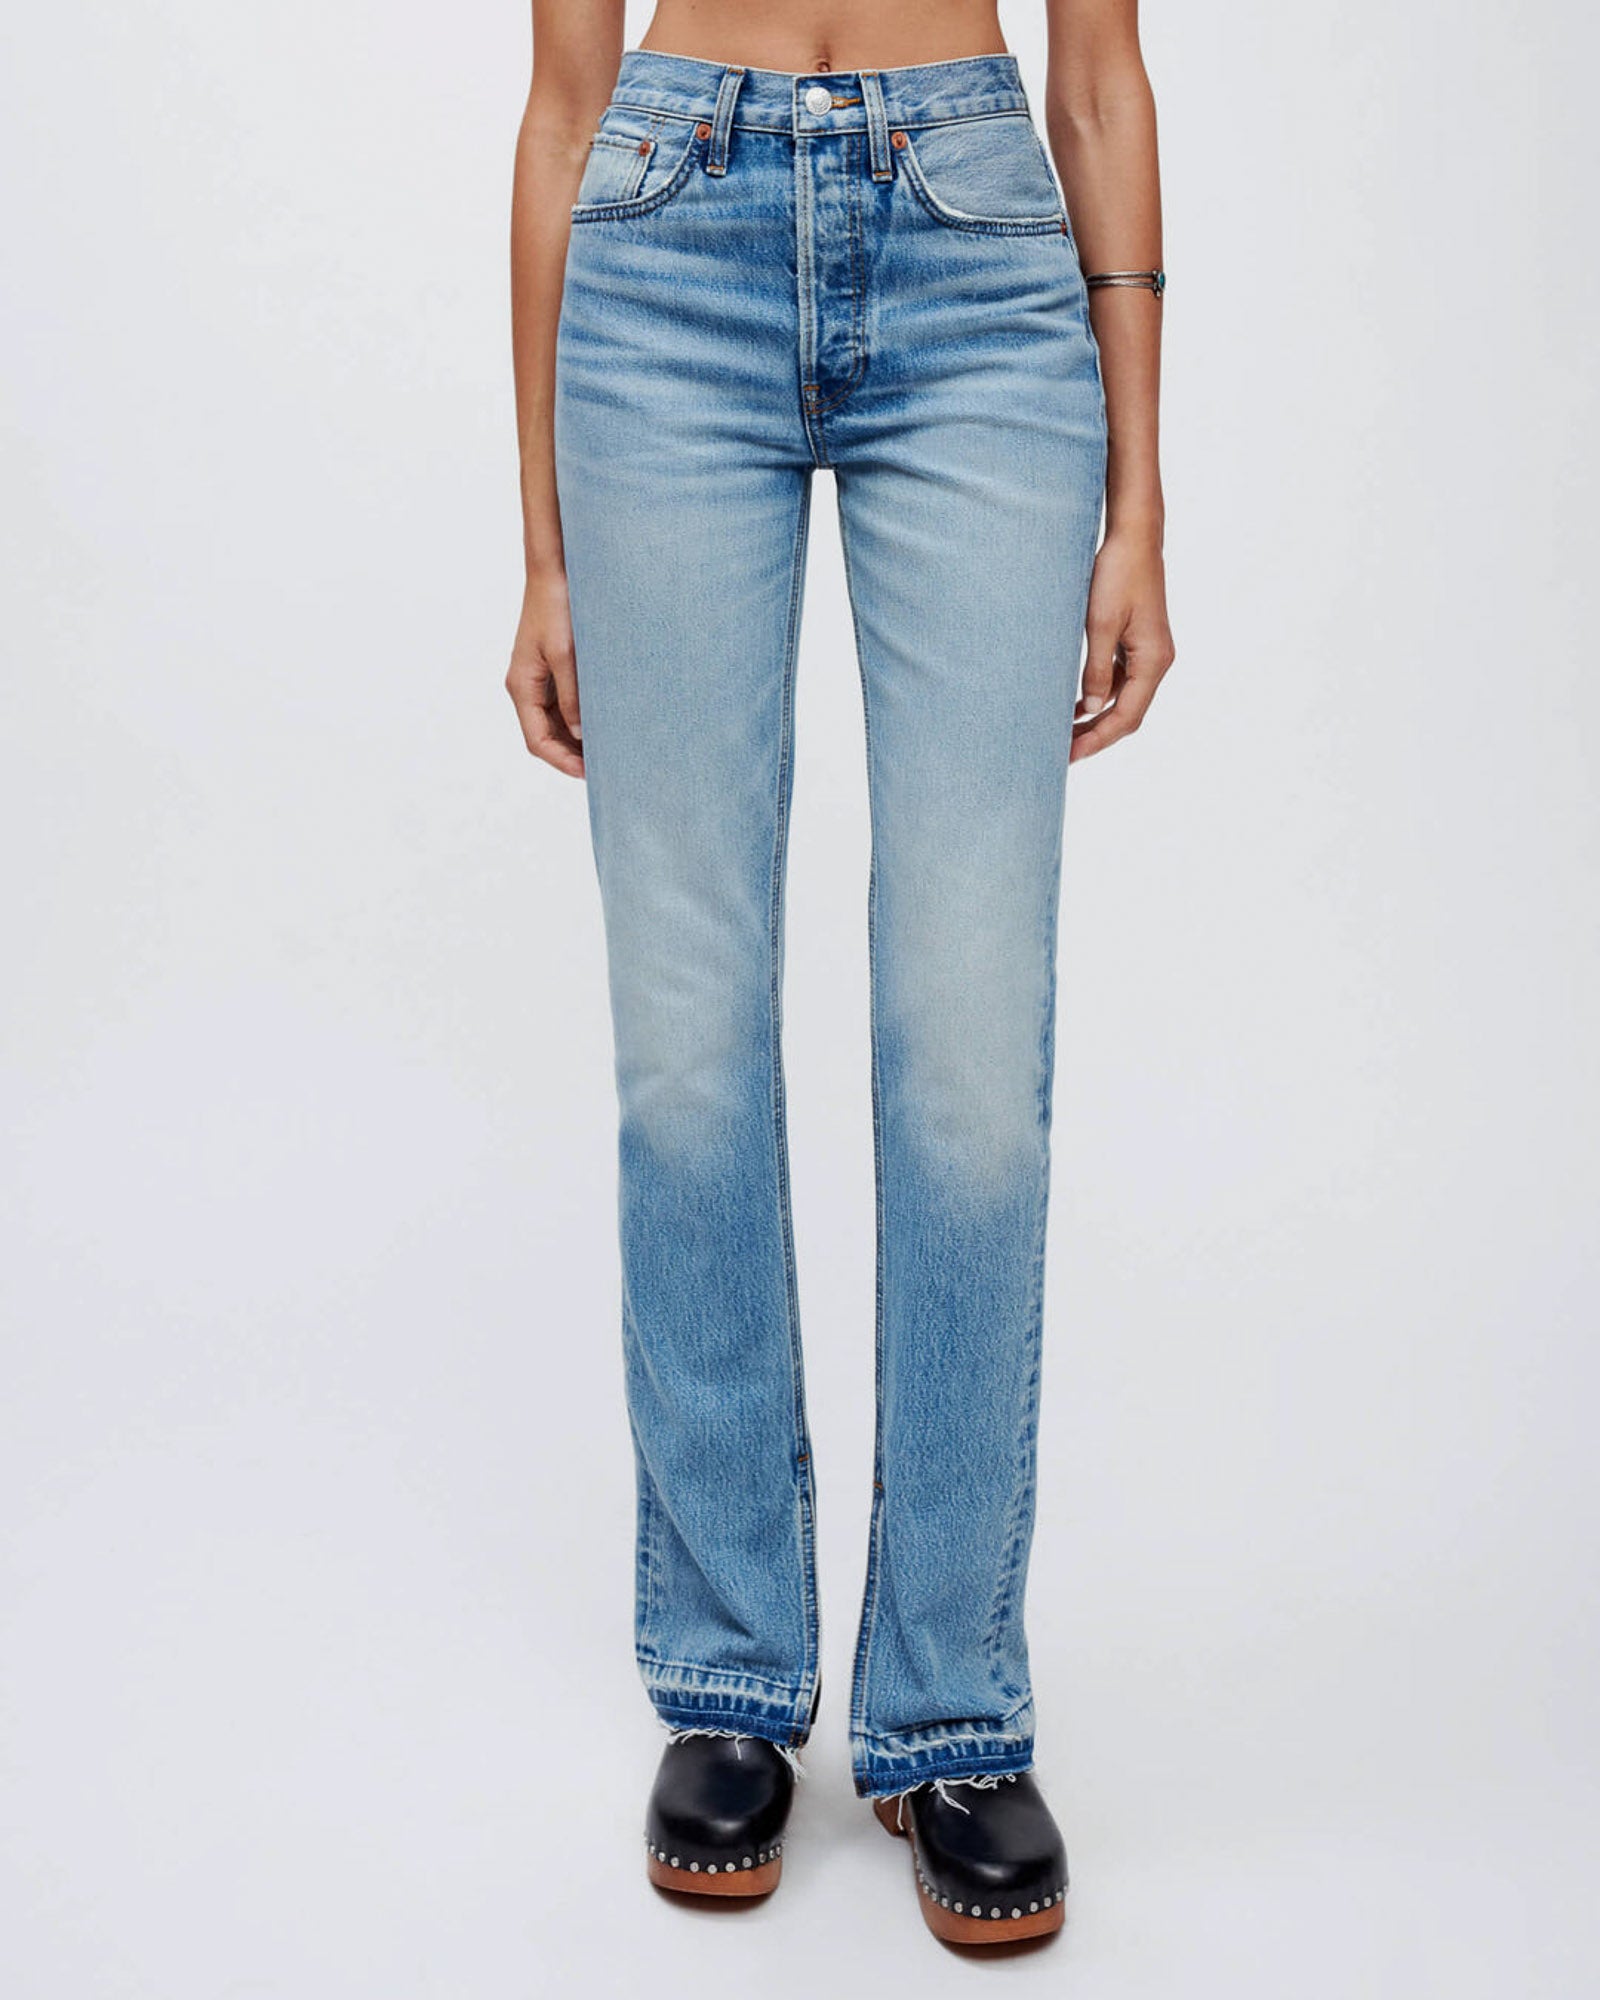 70s high rise skinny jeans w/ slits - RE/DONE - Women